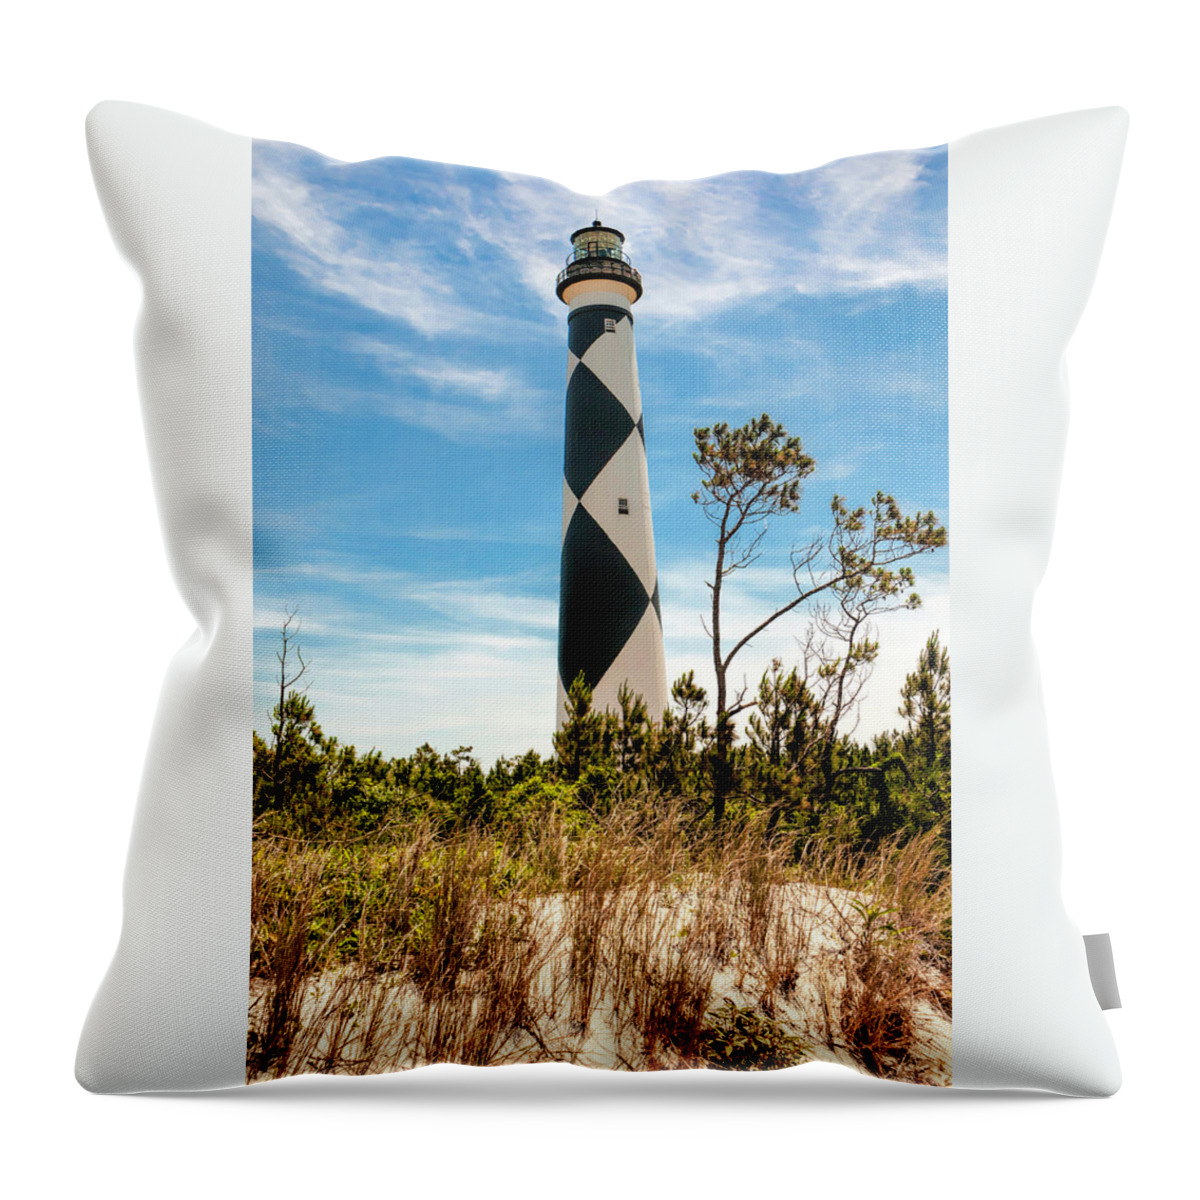 Cape Lookout Light No 2 Throw Pillow featuring the photograph Cape Lookout Light No 2 by Phyllis Taylor